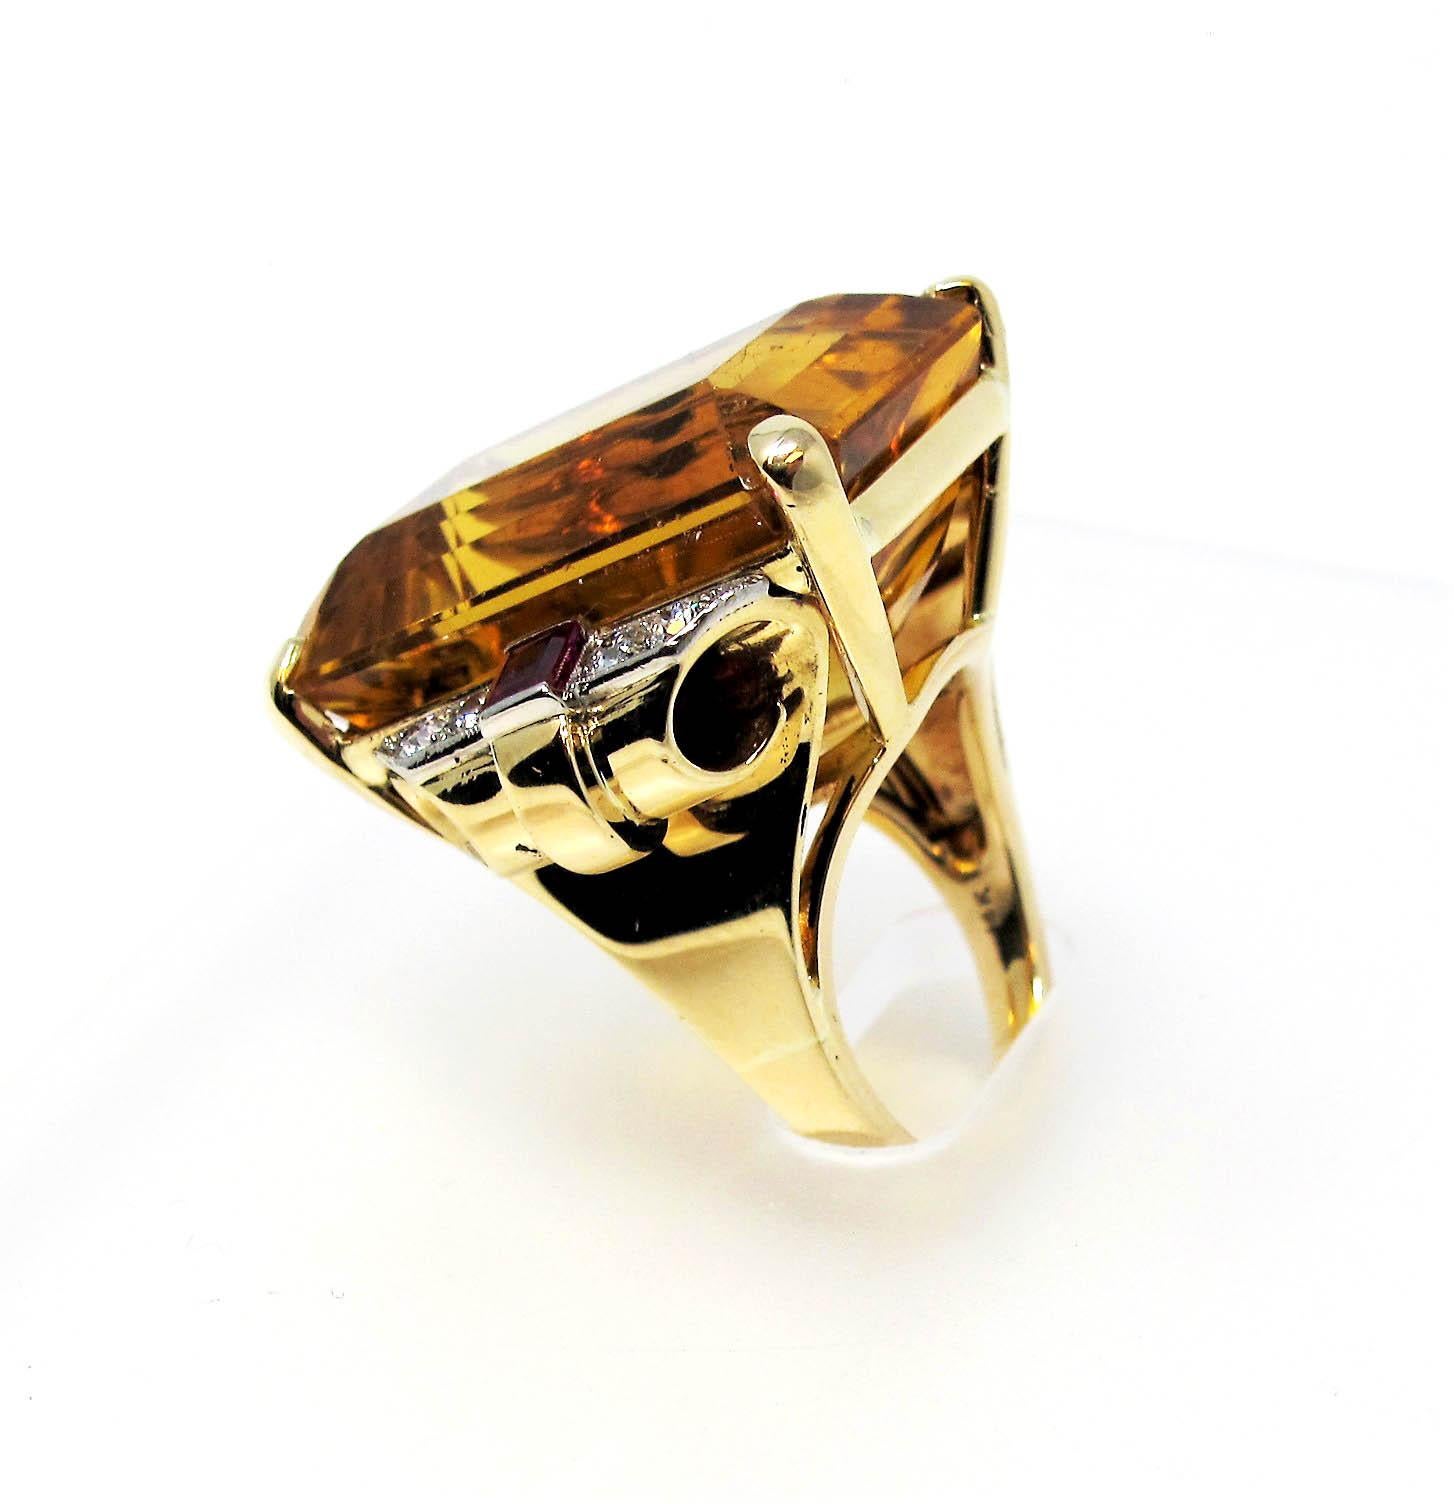 48.67 Carat Citrine, Diamond and Ruby Cocktail Ring in 14 Karat Yellow Gold 4